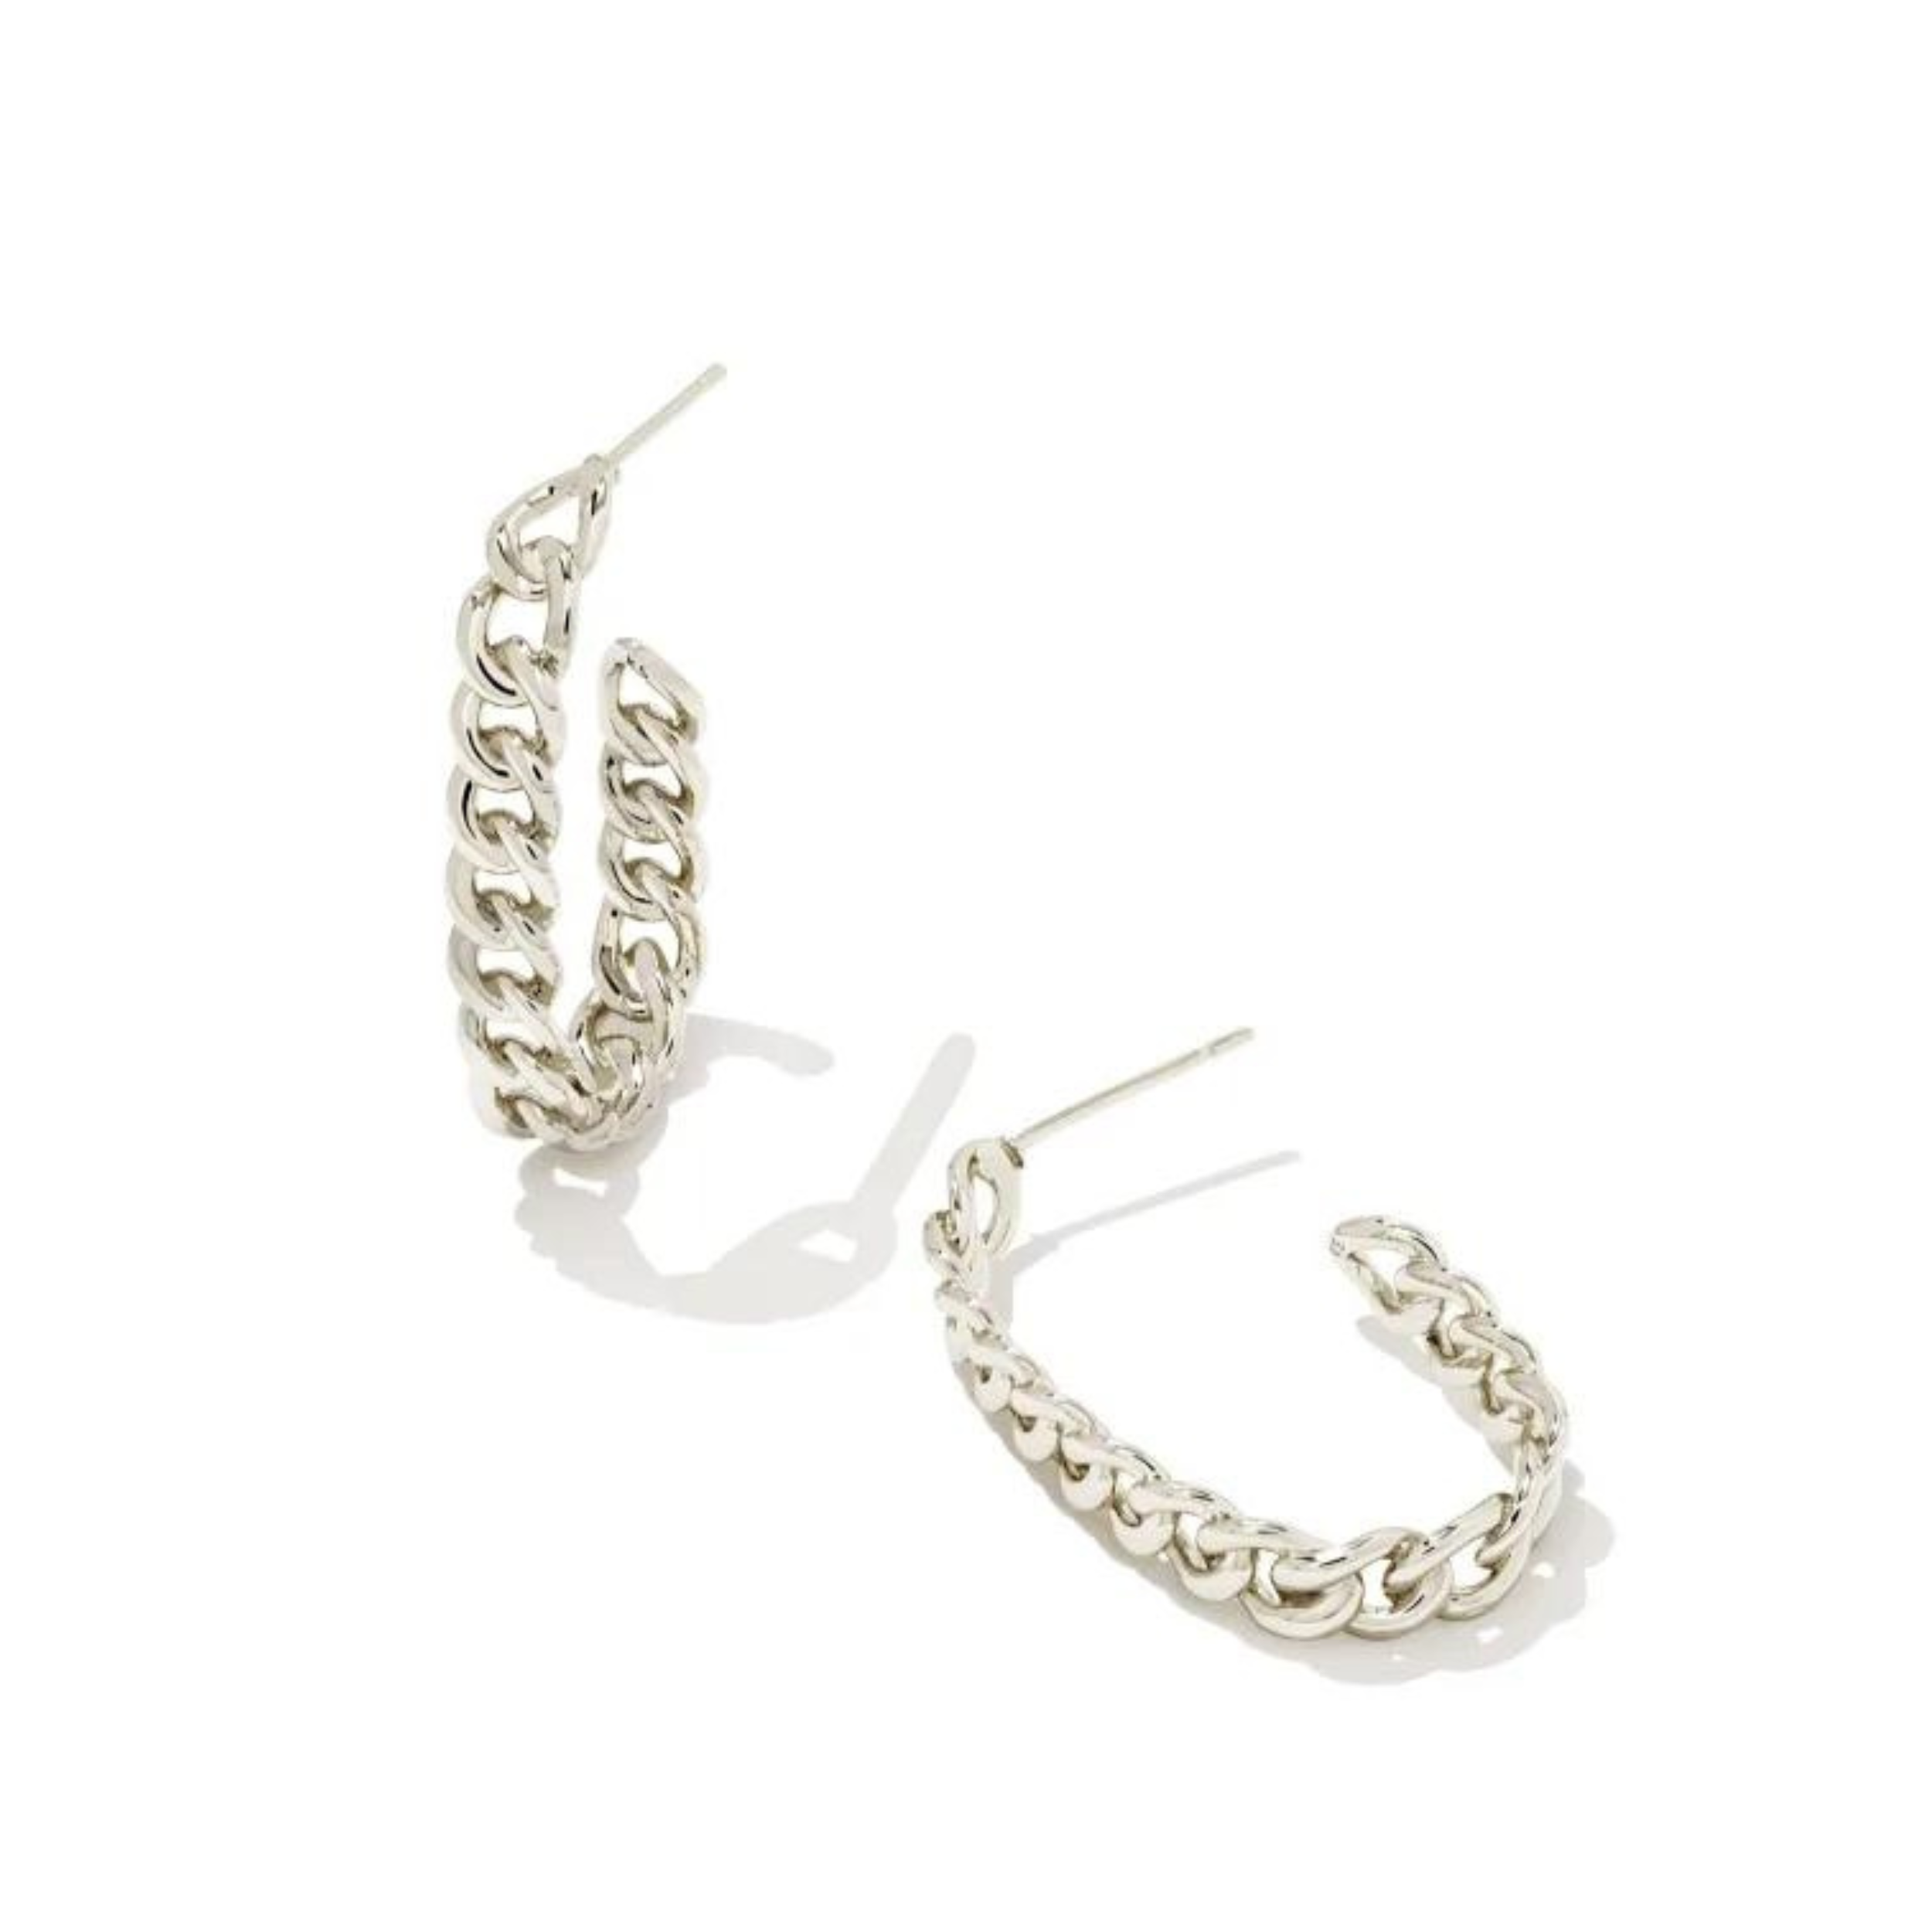 Silver chain link hoop earrings pictured on a white background.